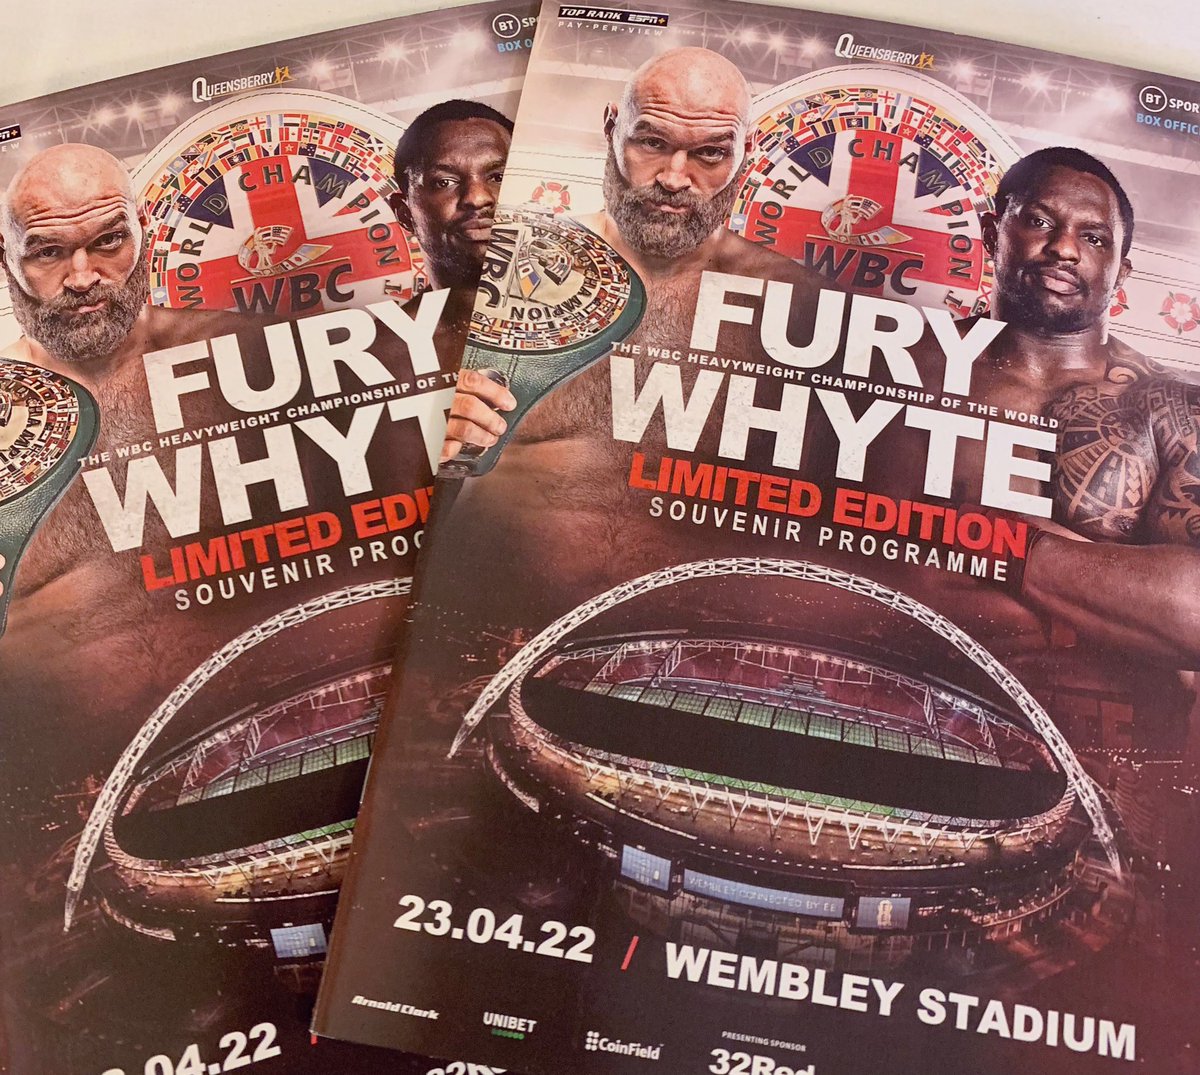 FURY-WHYTE GIVEAWAY 🎁 

🥊 Following Saturday night’s #FuryWhyte bout I have 4 official programmes to giveaway from what could be @Tyson_Fury’s final fight. 

Just drop me a follow and retweet this post and I will chose the winners on Friday.

Good luck all! 🤞

#Boxing